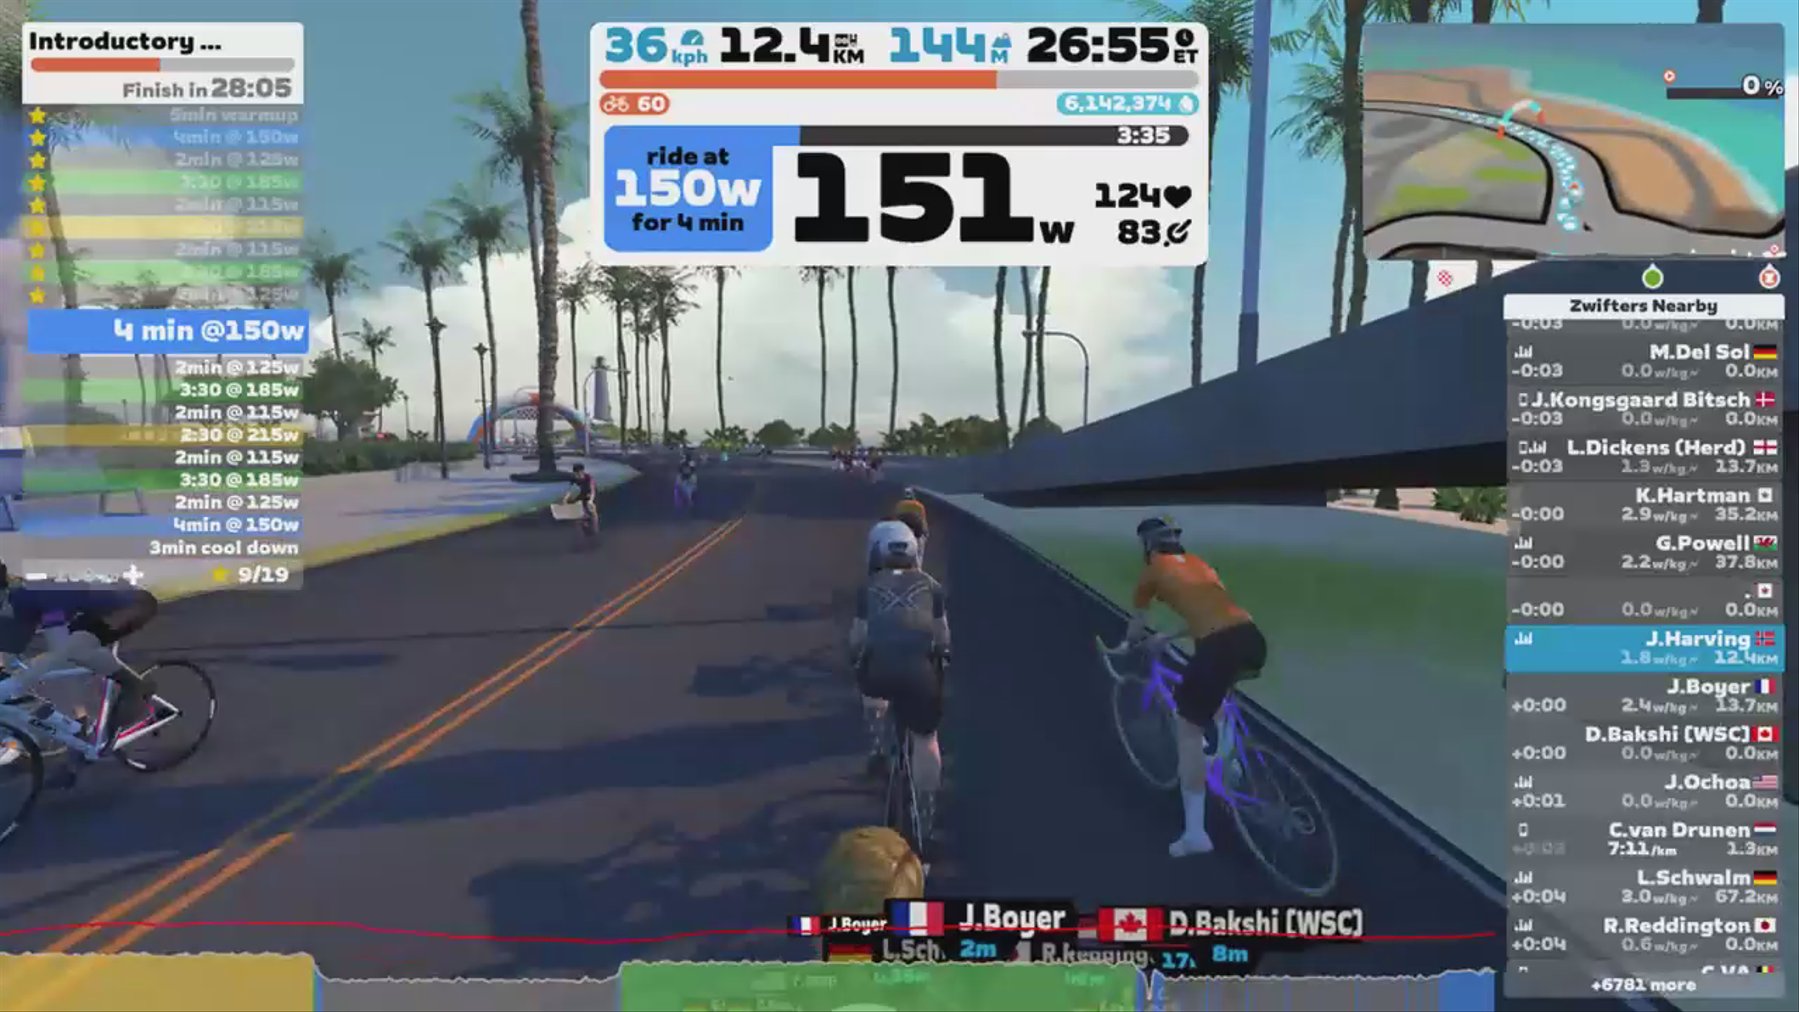 Zwift - Introductory Intervals in Watopia